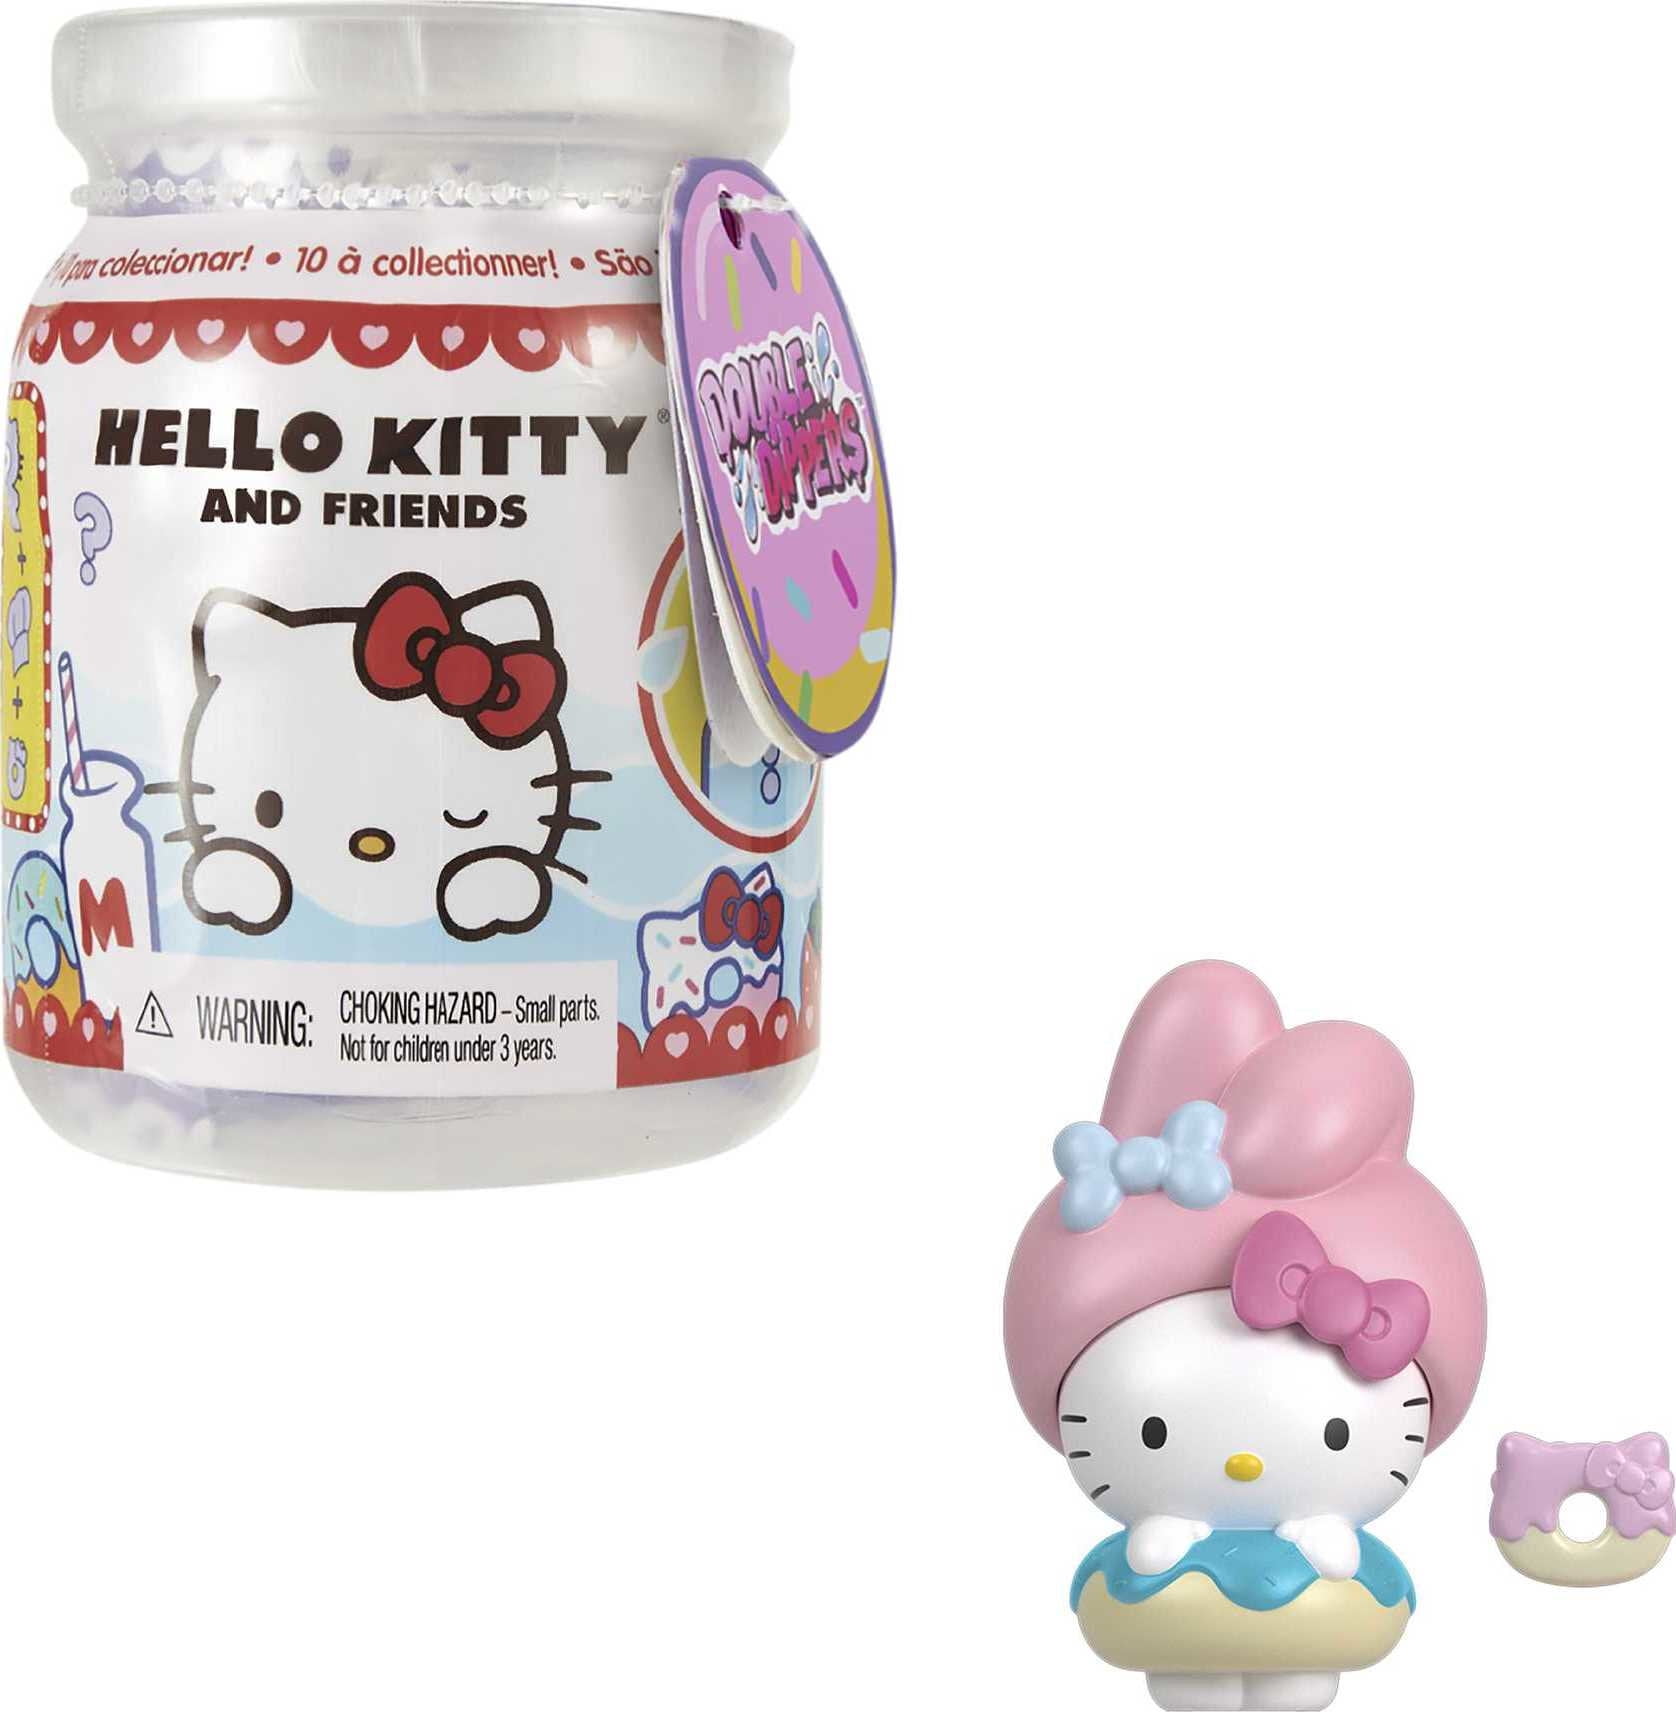 Hello Kitty by Sanrio Blind box Figurines Complete Set Holiday 2019 USA 